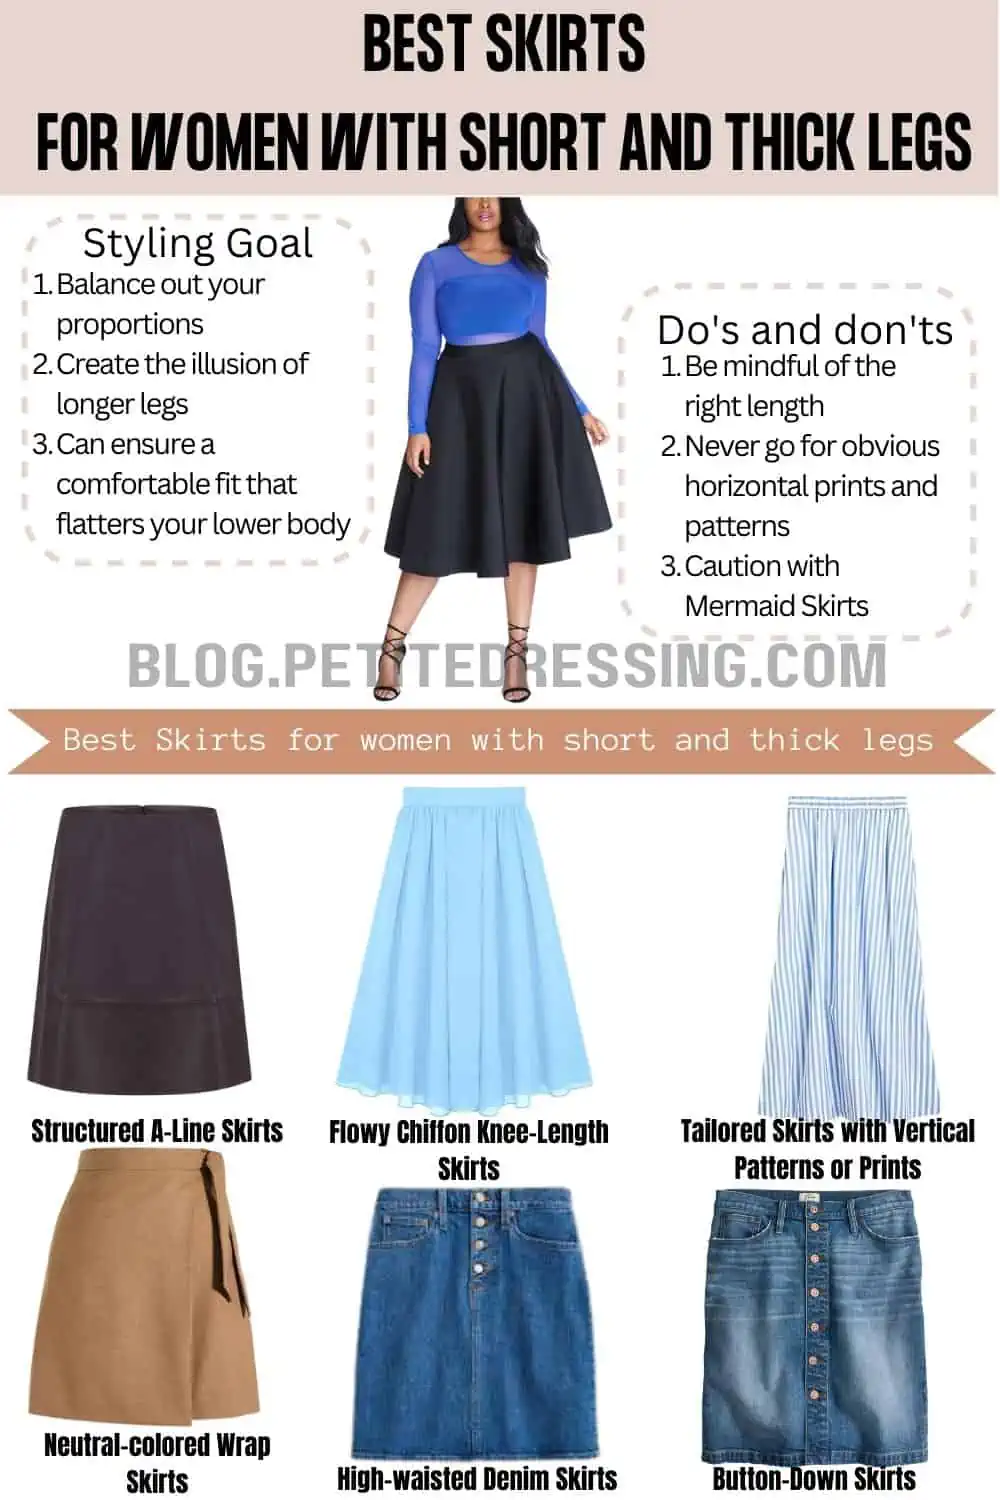 How to wear a mini skirt: the ultimate style guide